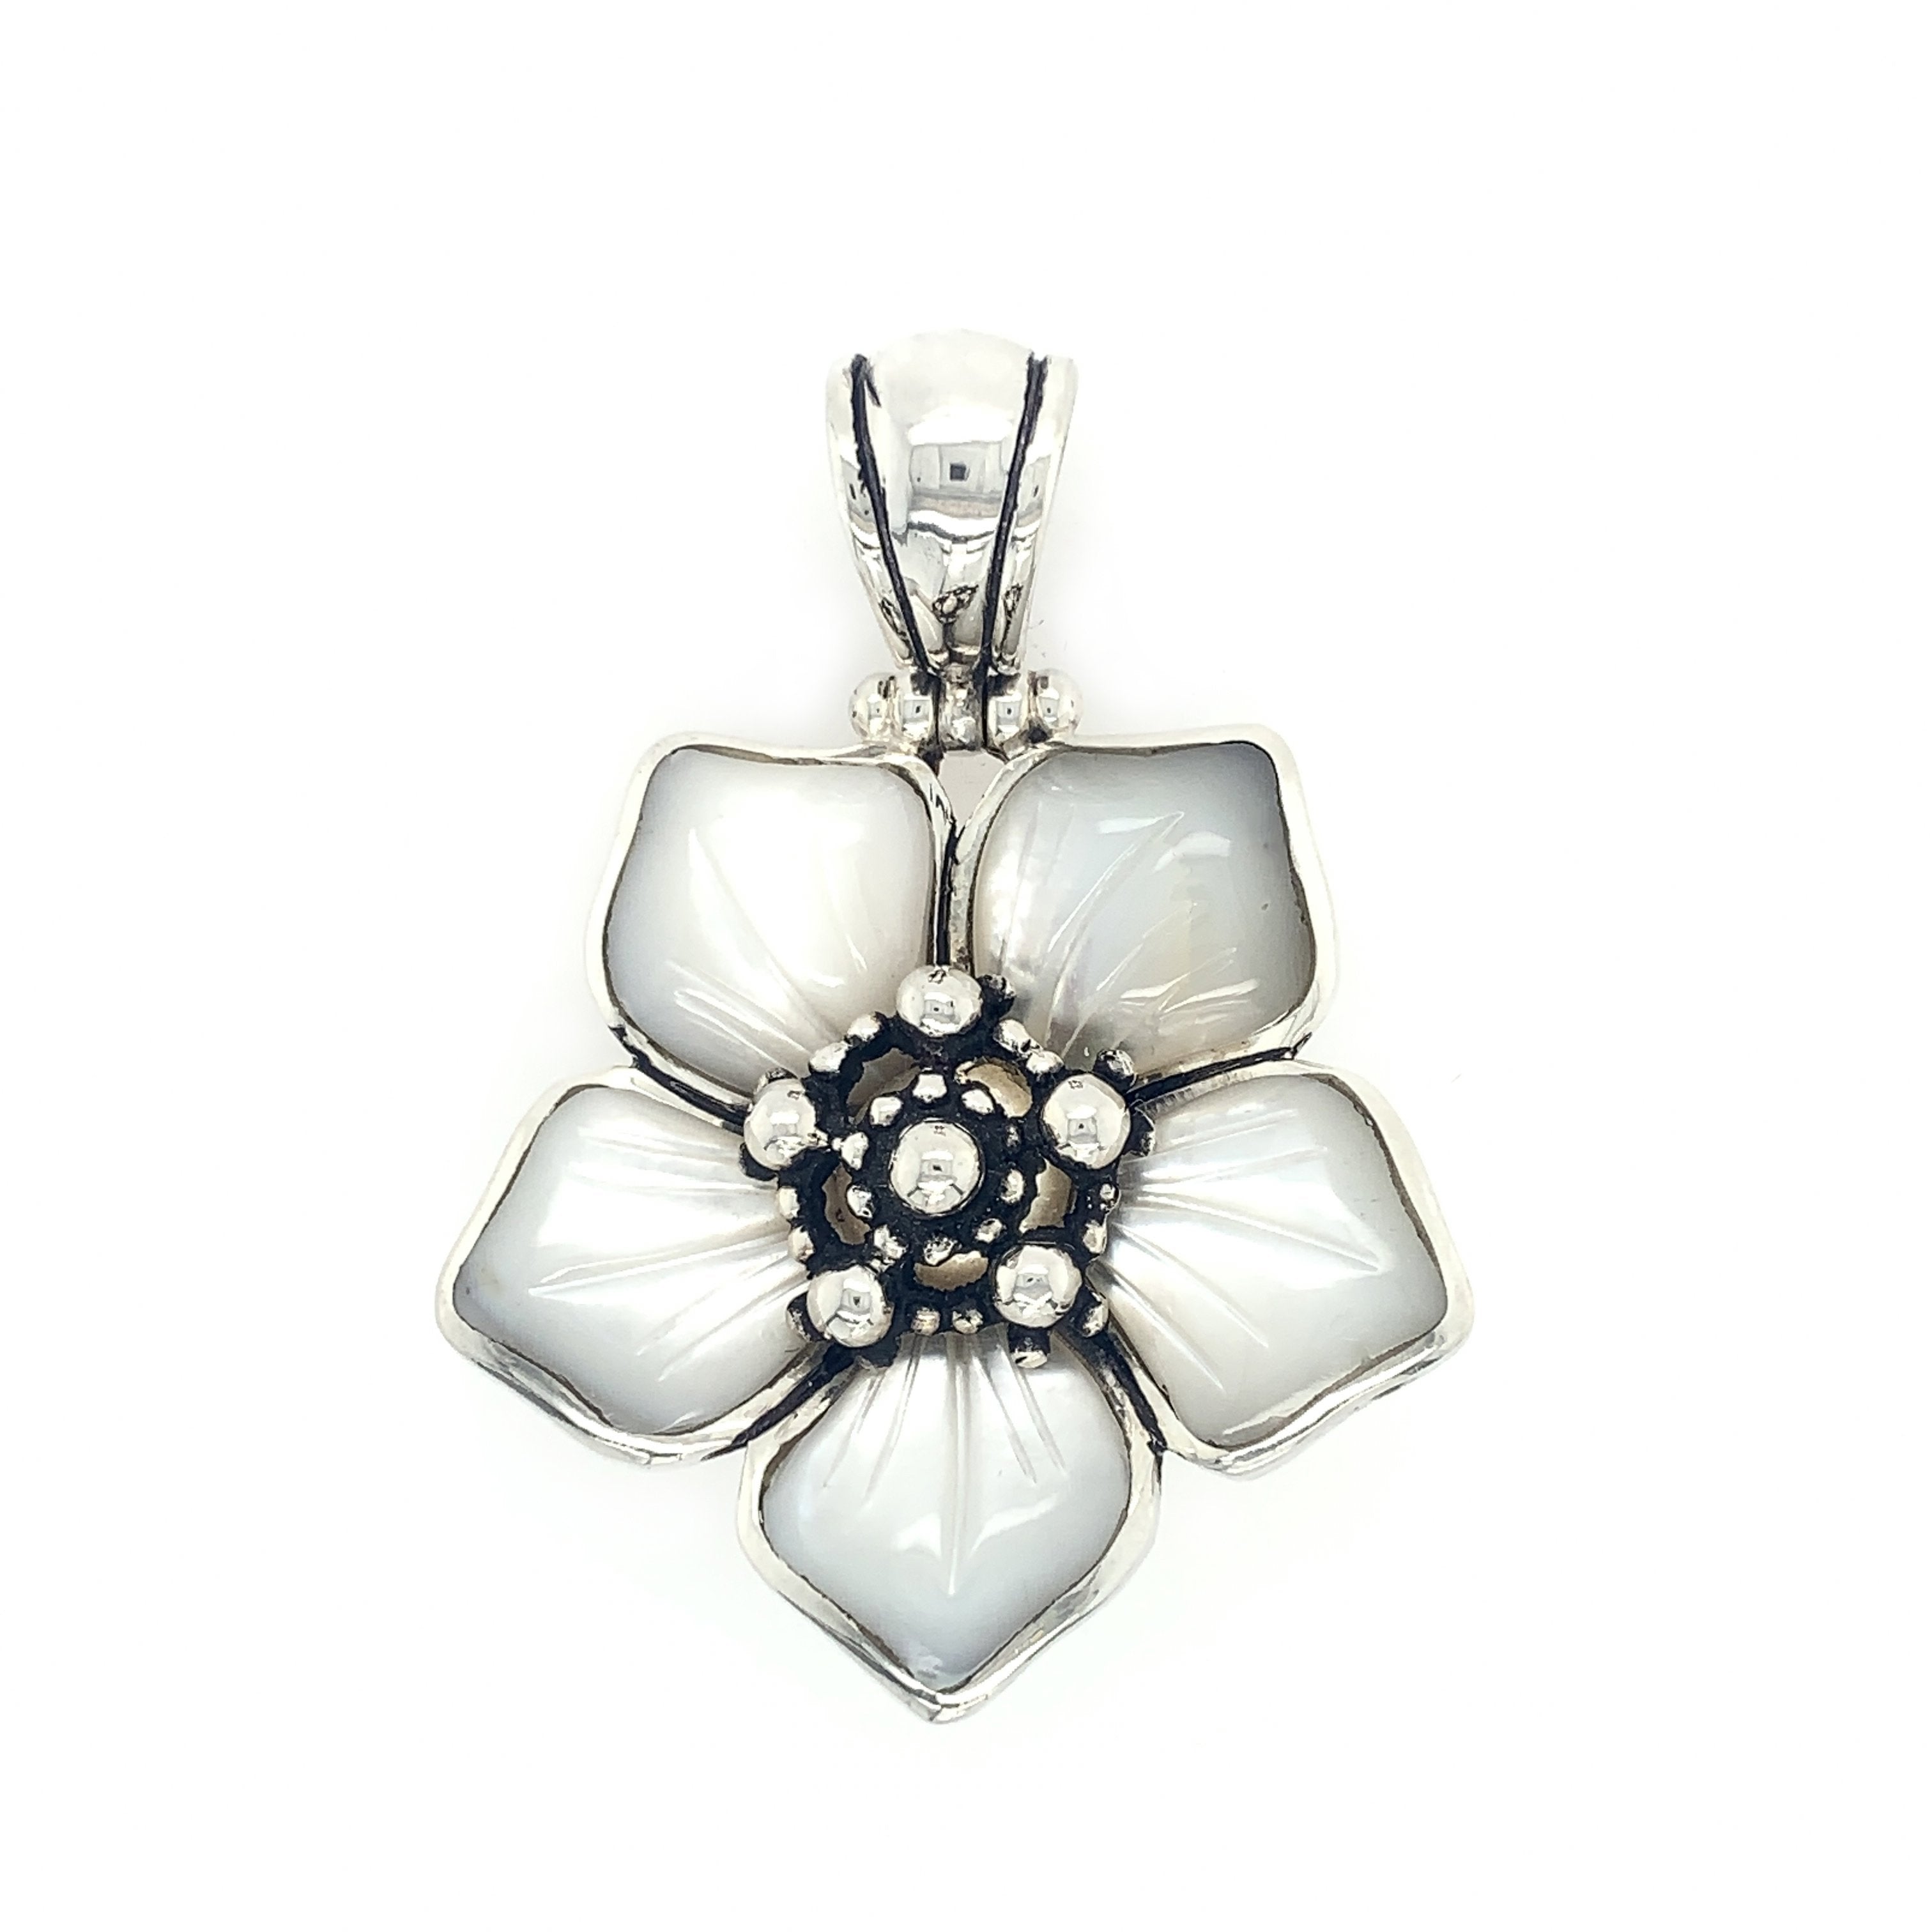 Tiny Japanese Pearl & Flower Necklace – River Song